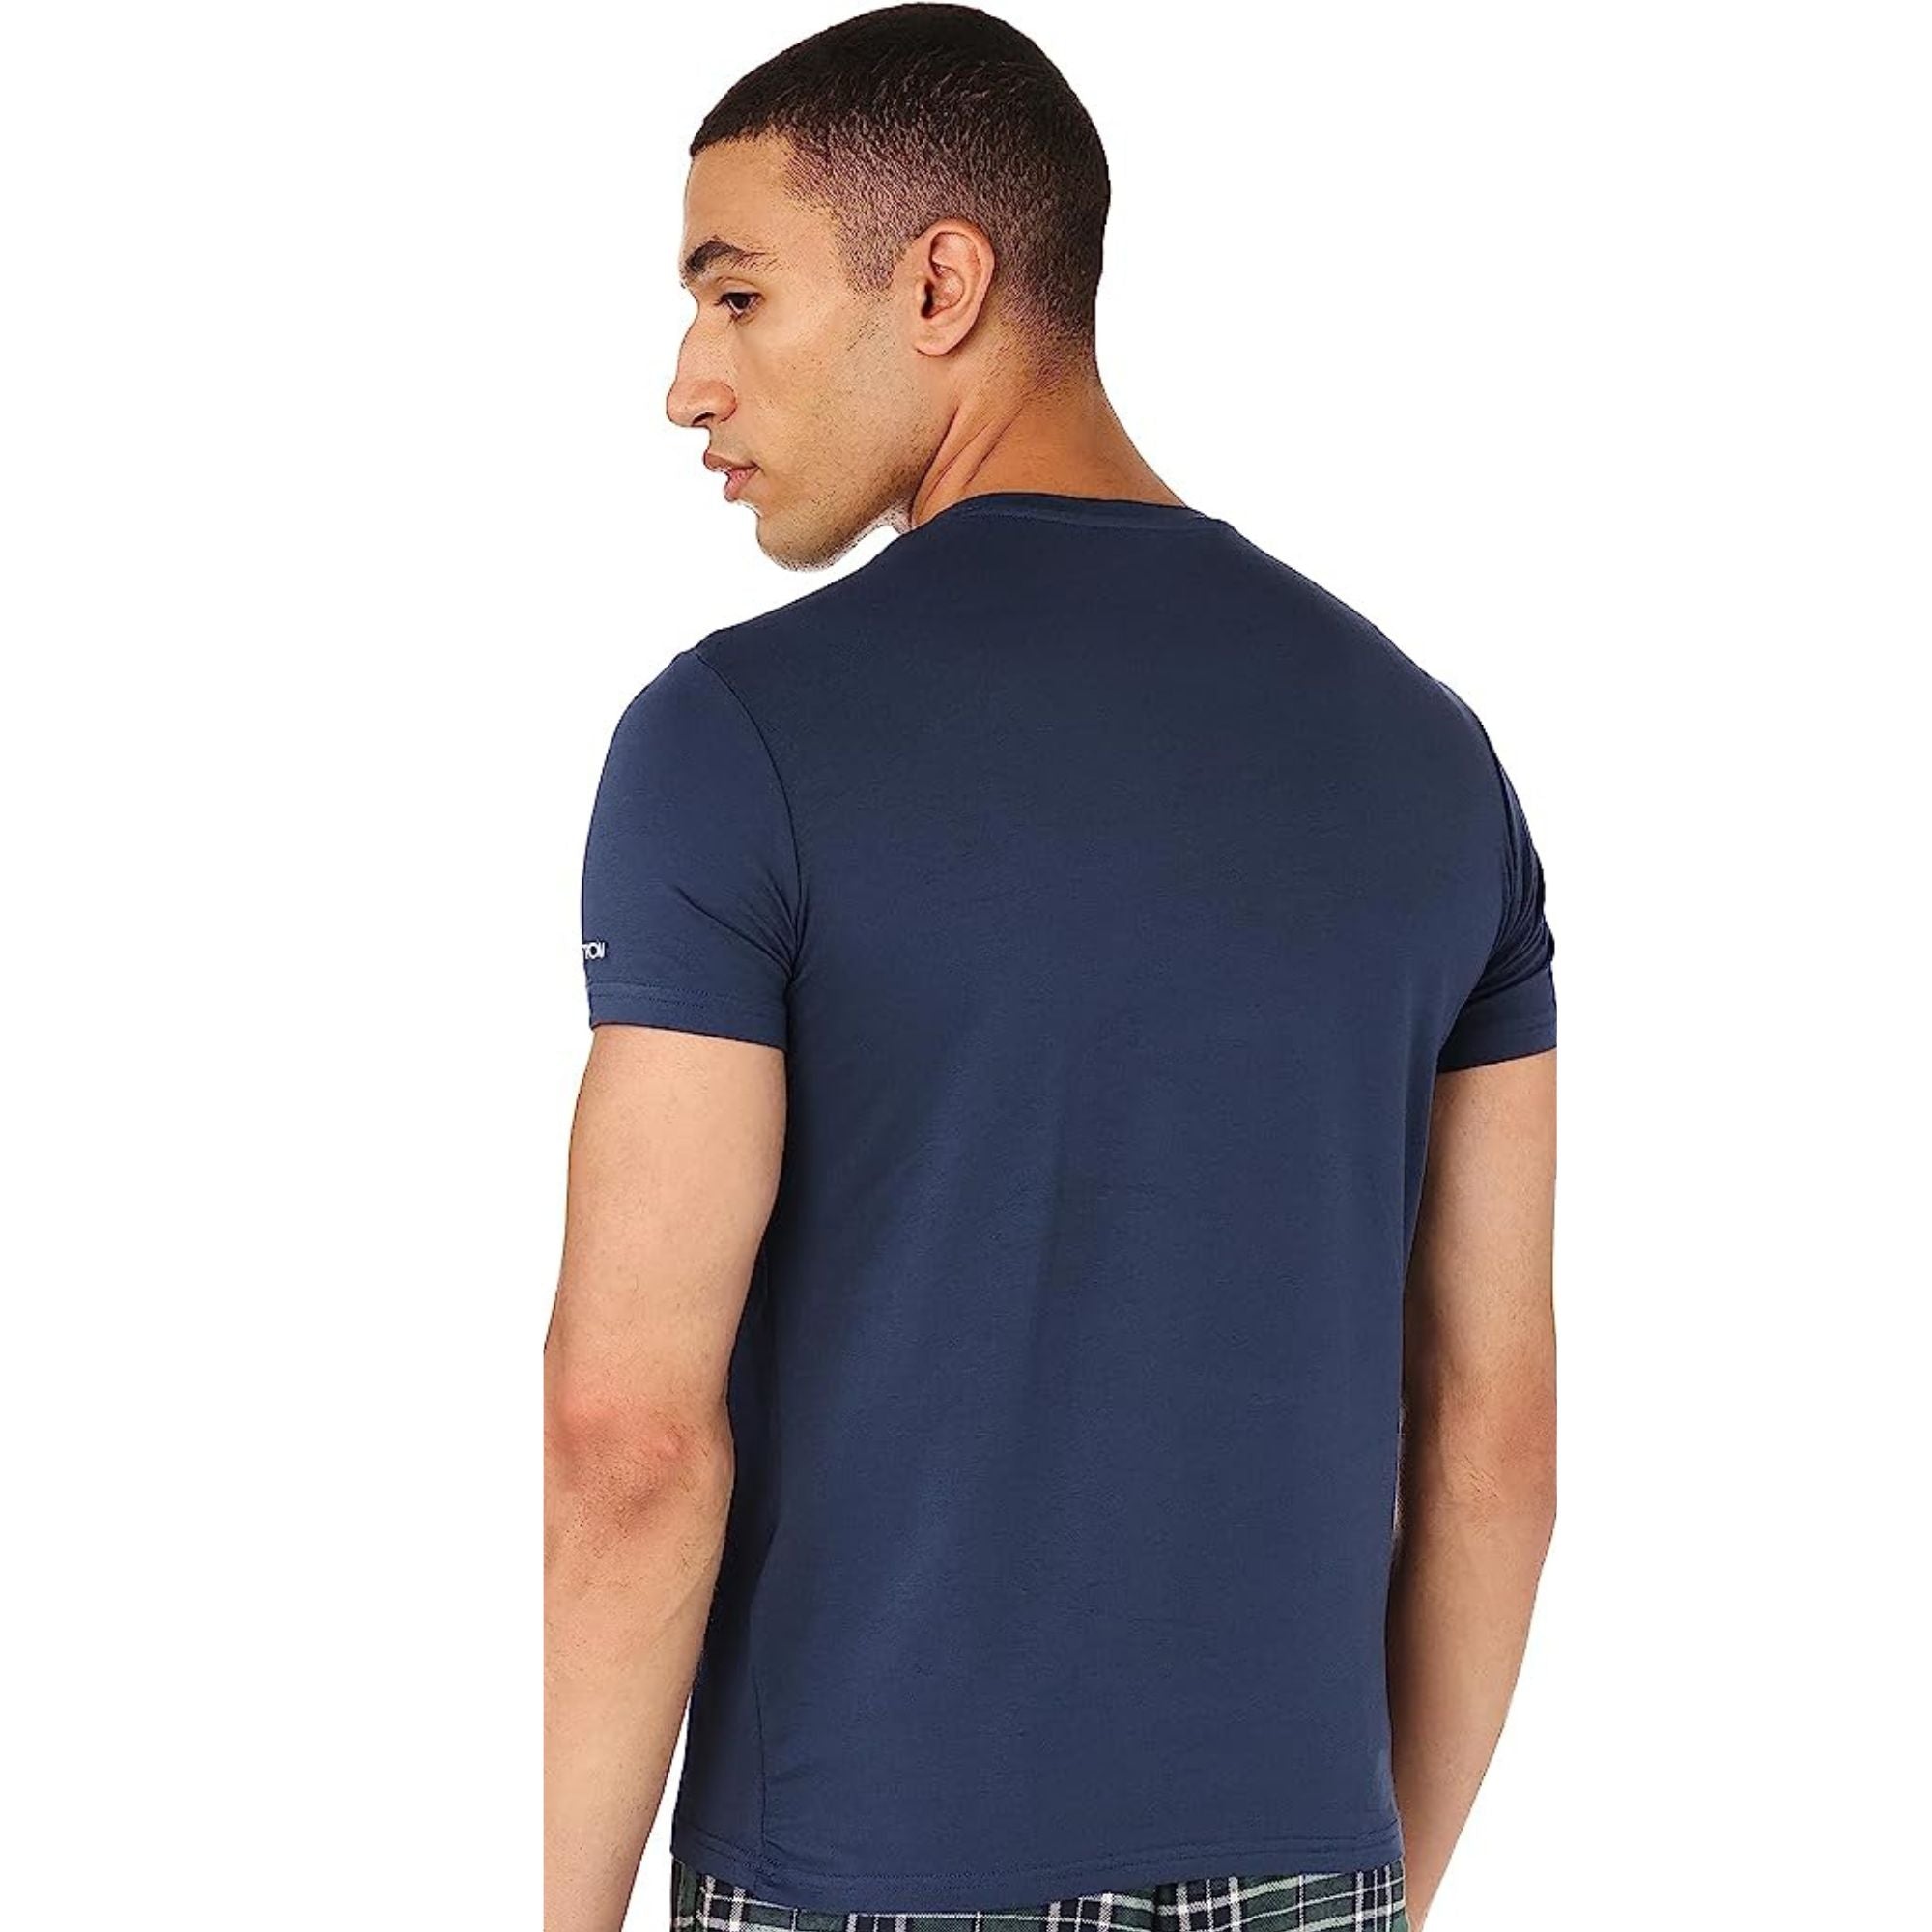 Undershirt for men, short sleeves, Requral fit from Red Cotton, Navy Blue